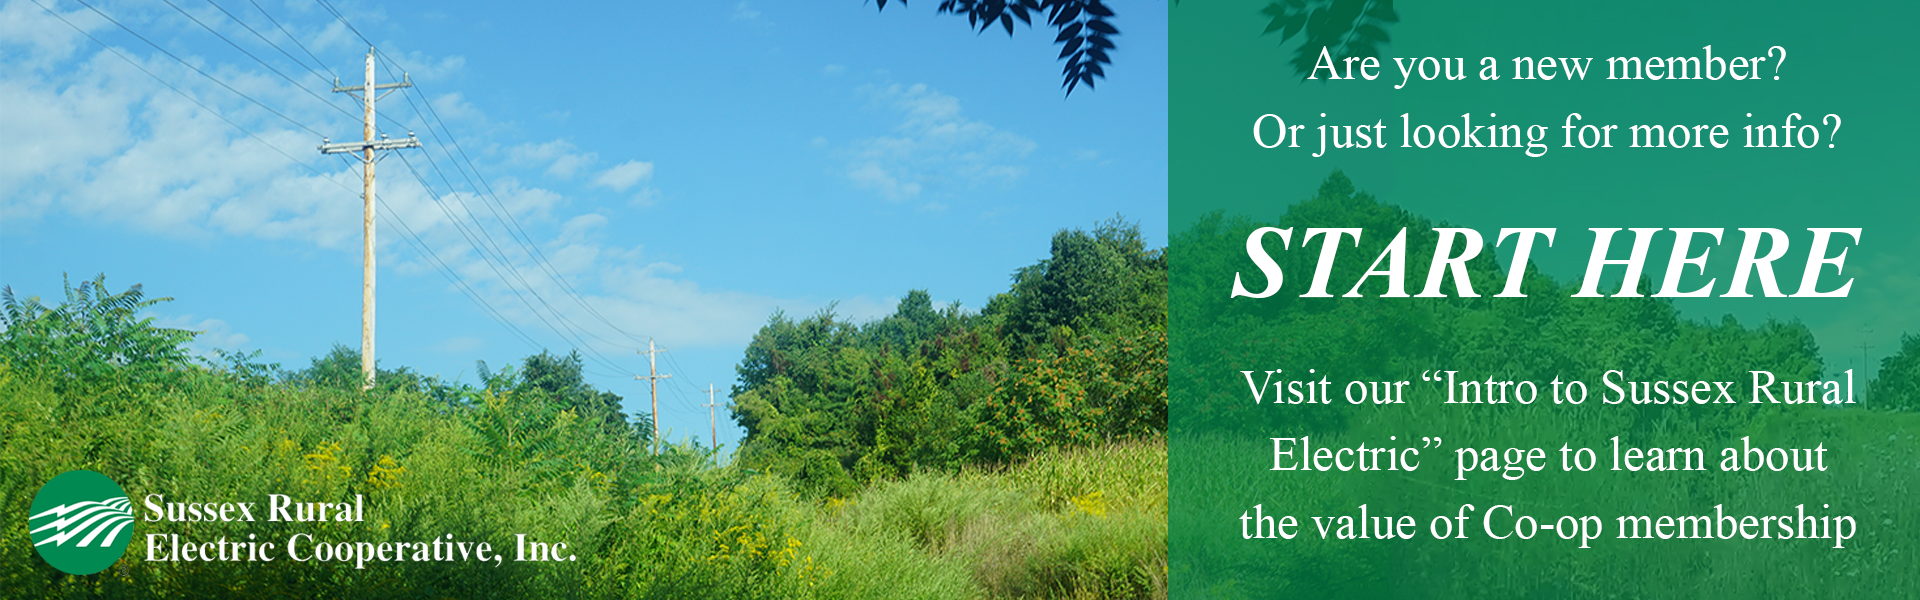 Are you a new member? Or just looking for more info? START HERE! Visit our "Intro to Sussex Rural Electric" page to learn about the value of membership.